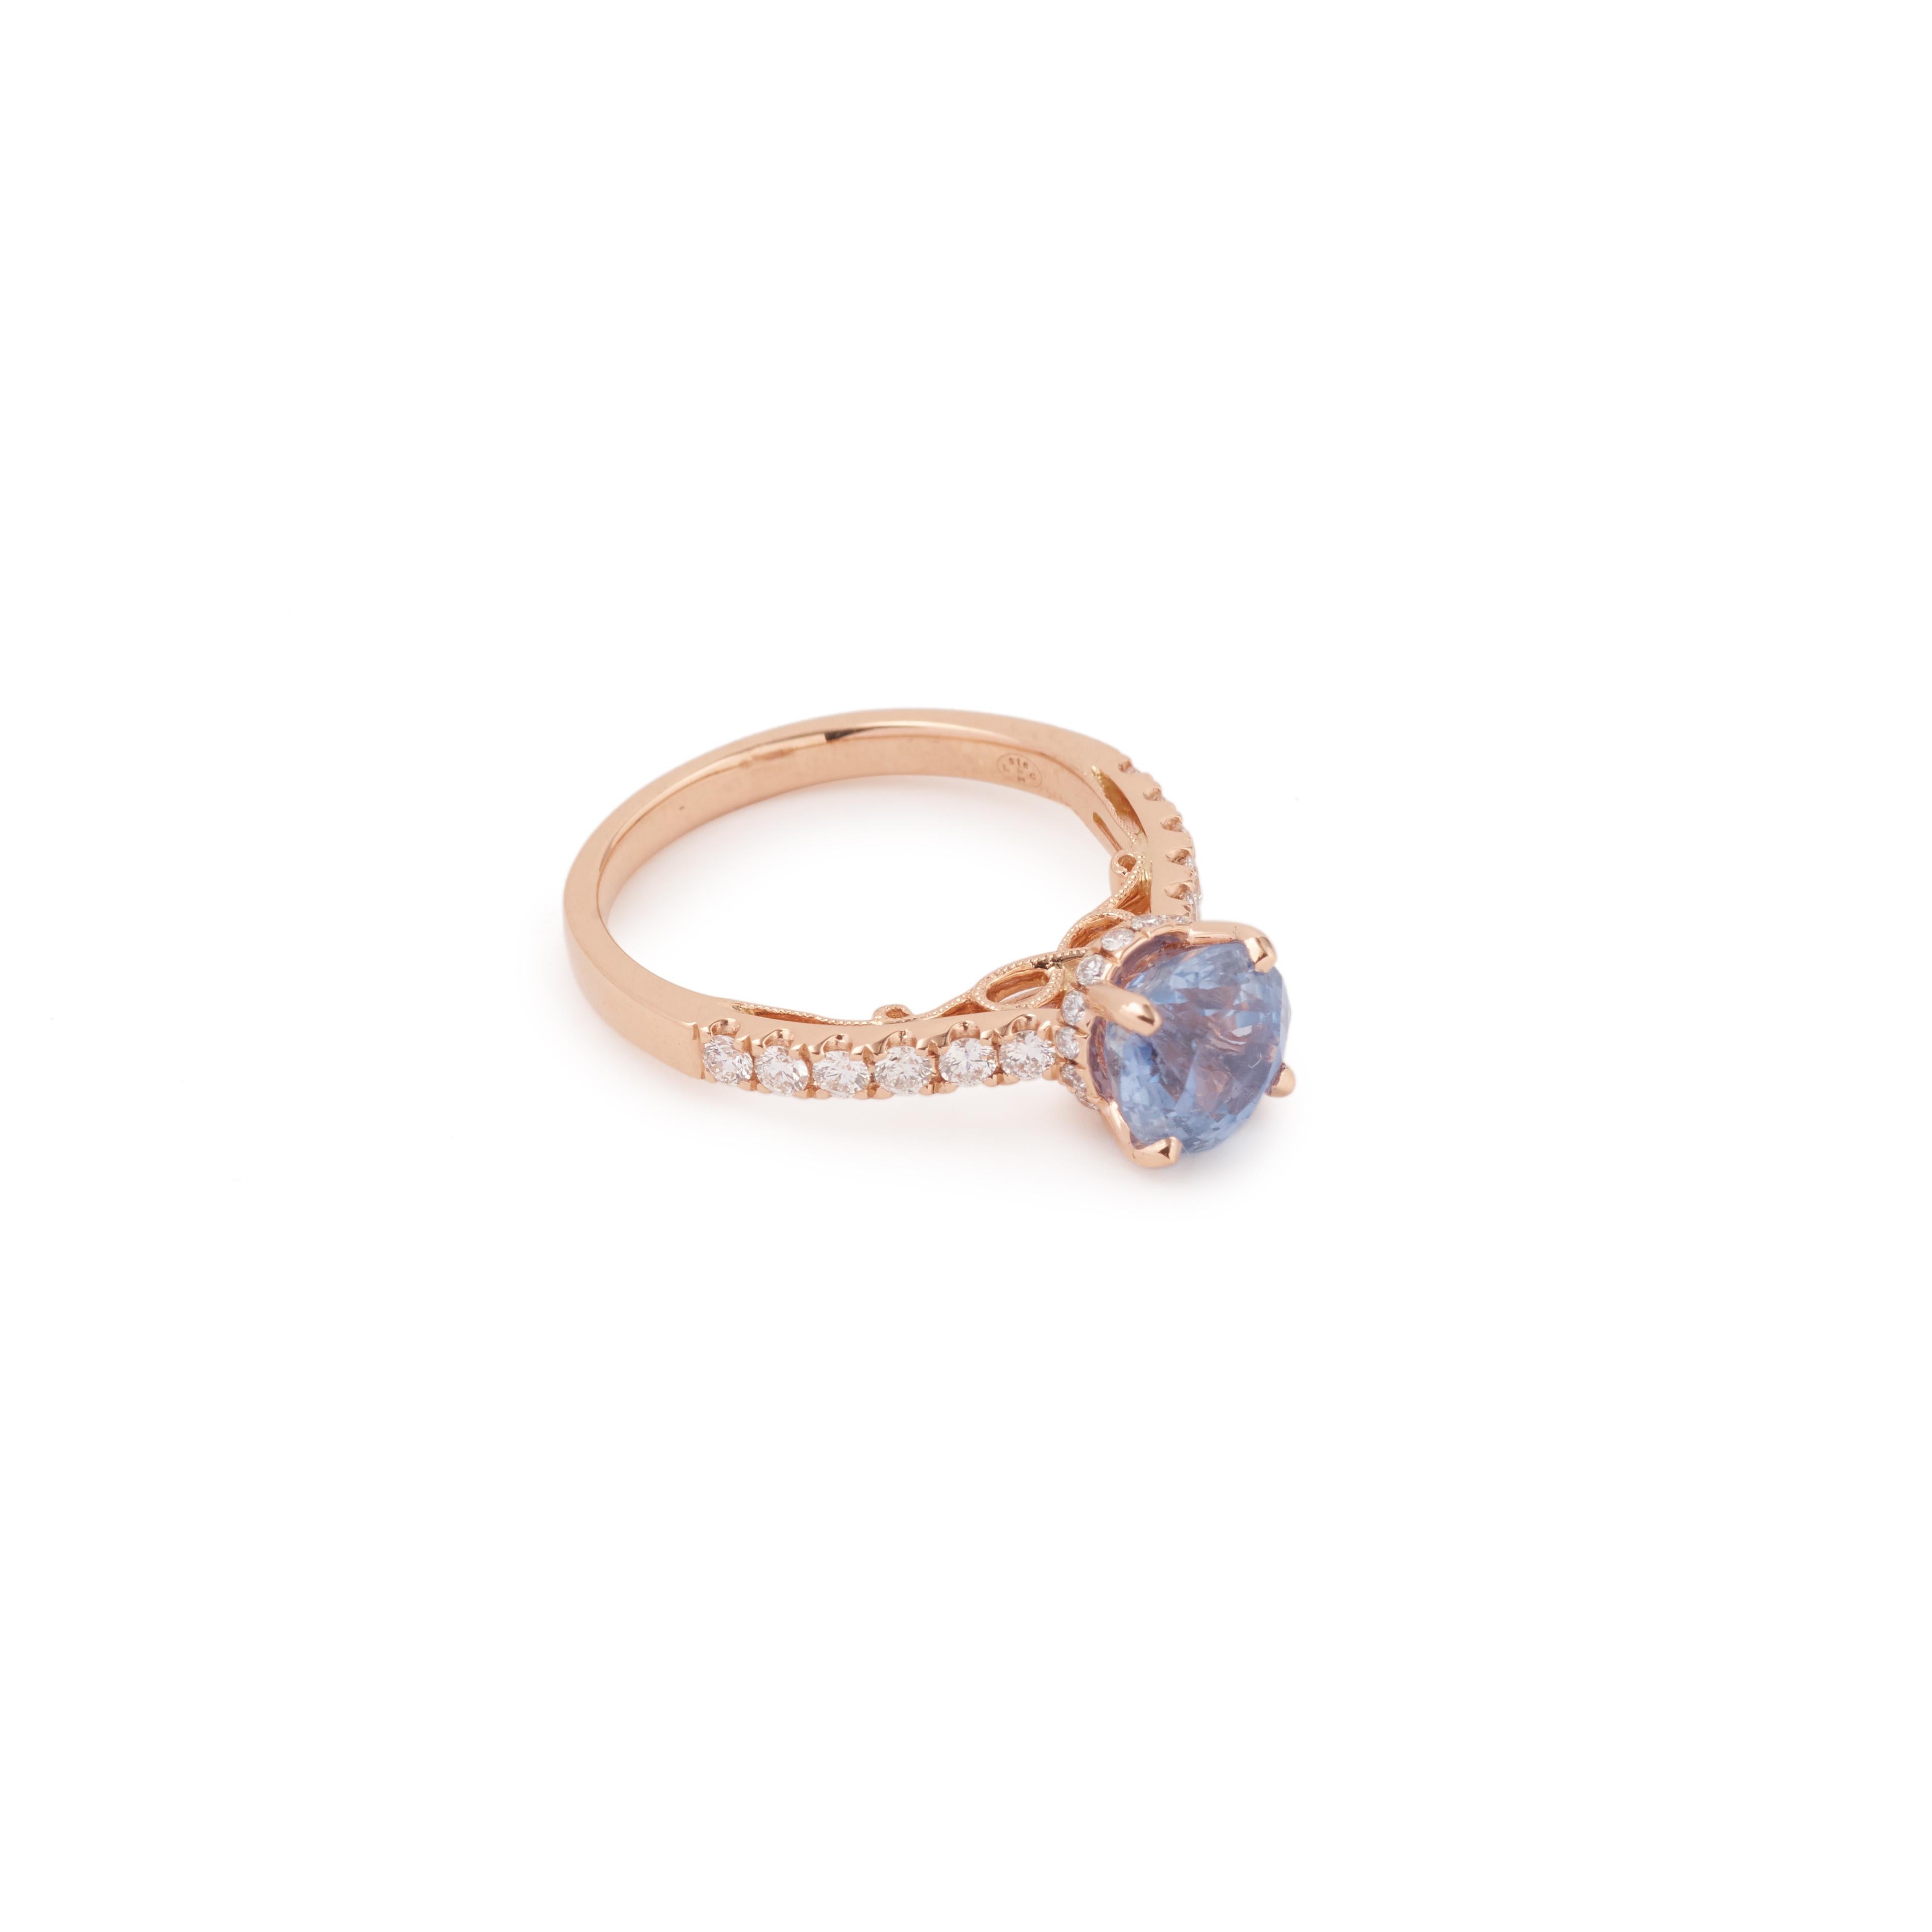 Rose gold ring set with a 2.44 carats round cut sapphire surrounded and shouldered with lines of brilliant diamonds.

Ideal for an engagement !

Sapphire weight : 2.44 carats

With Gem Paris certificate, specifying natural sapphire, without